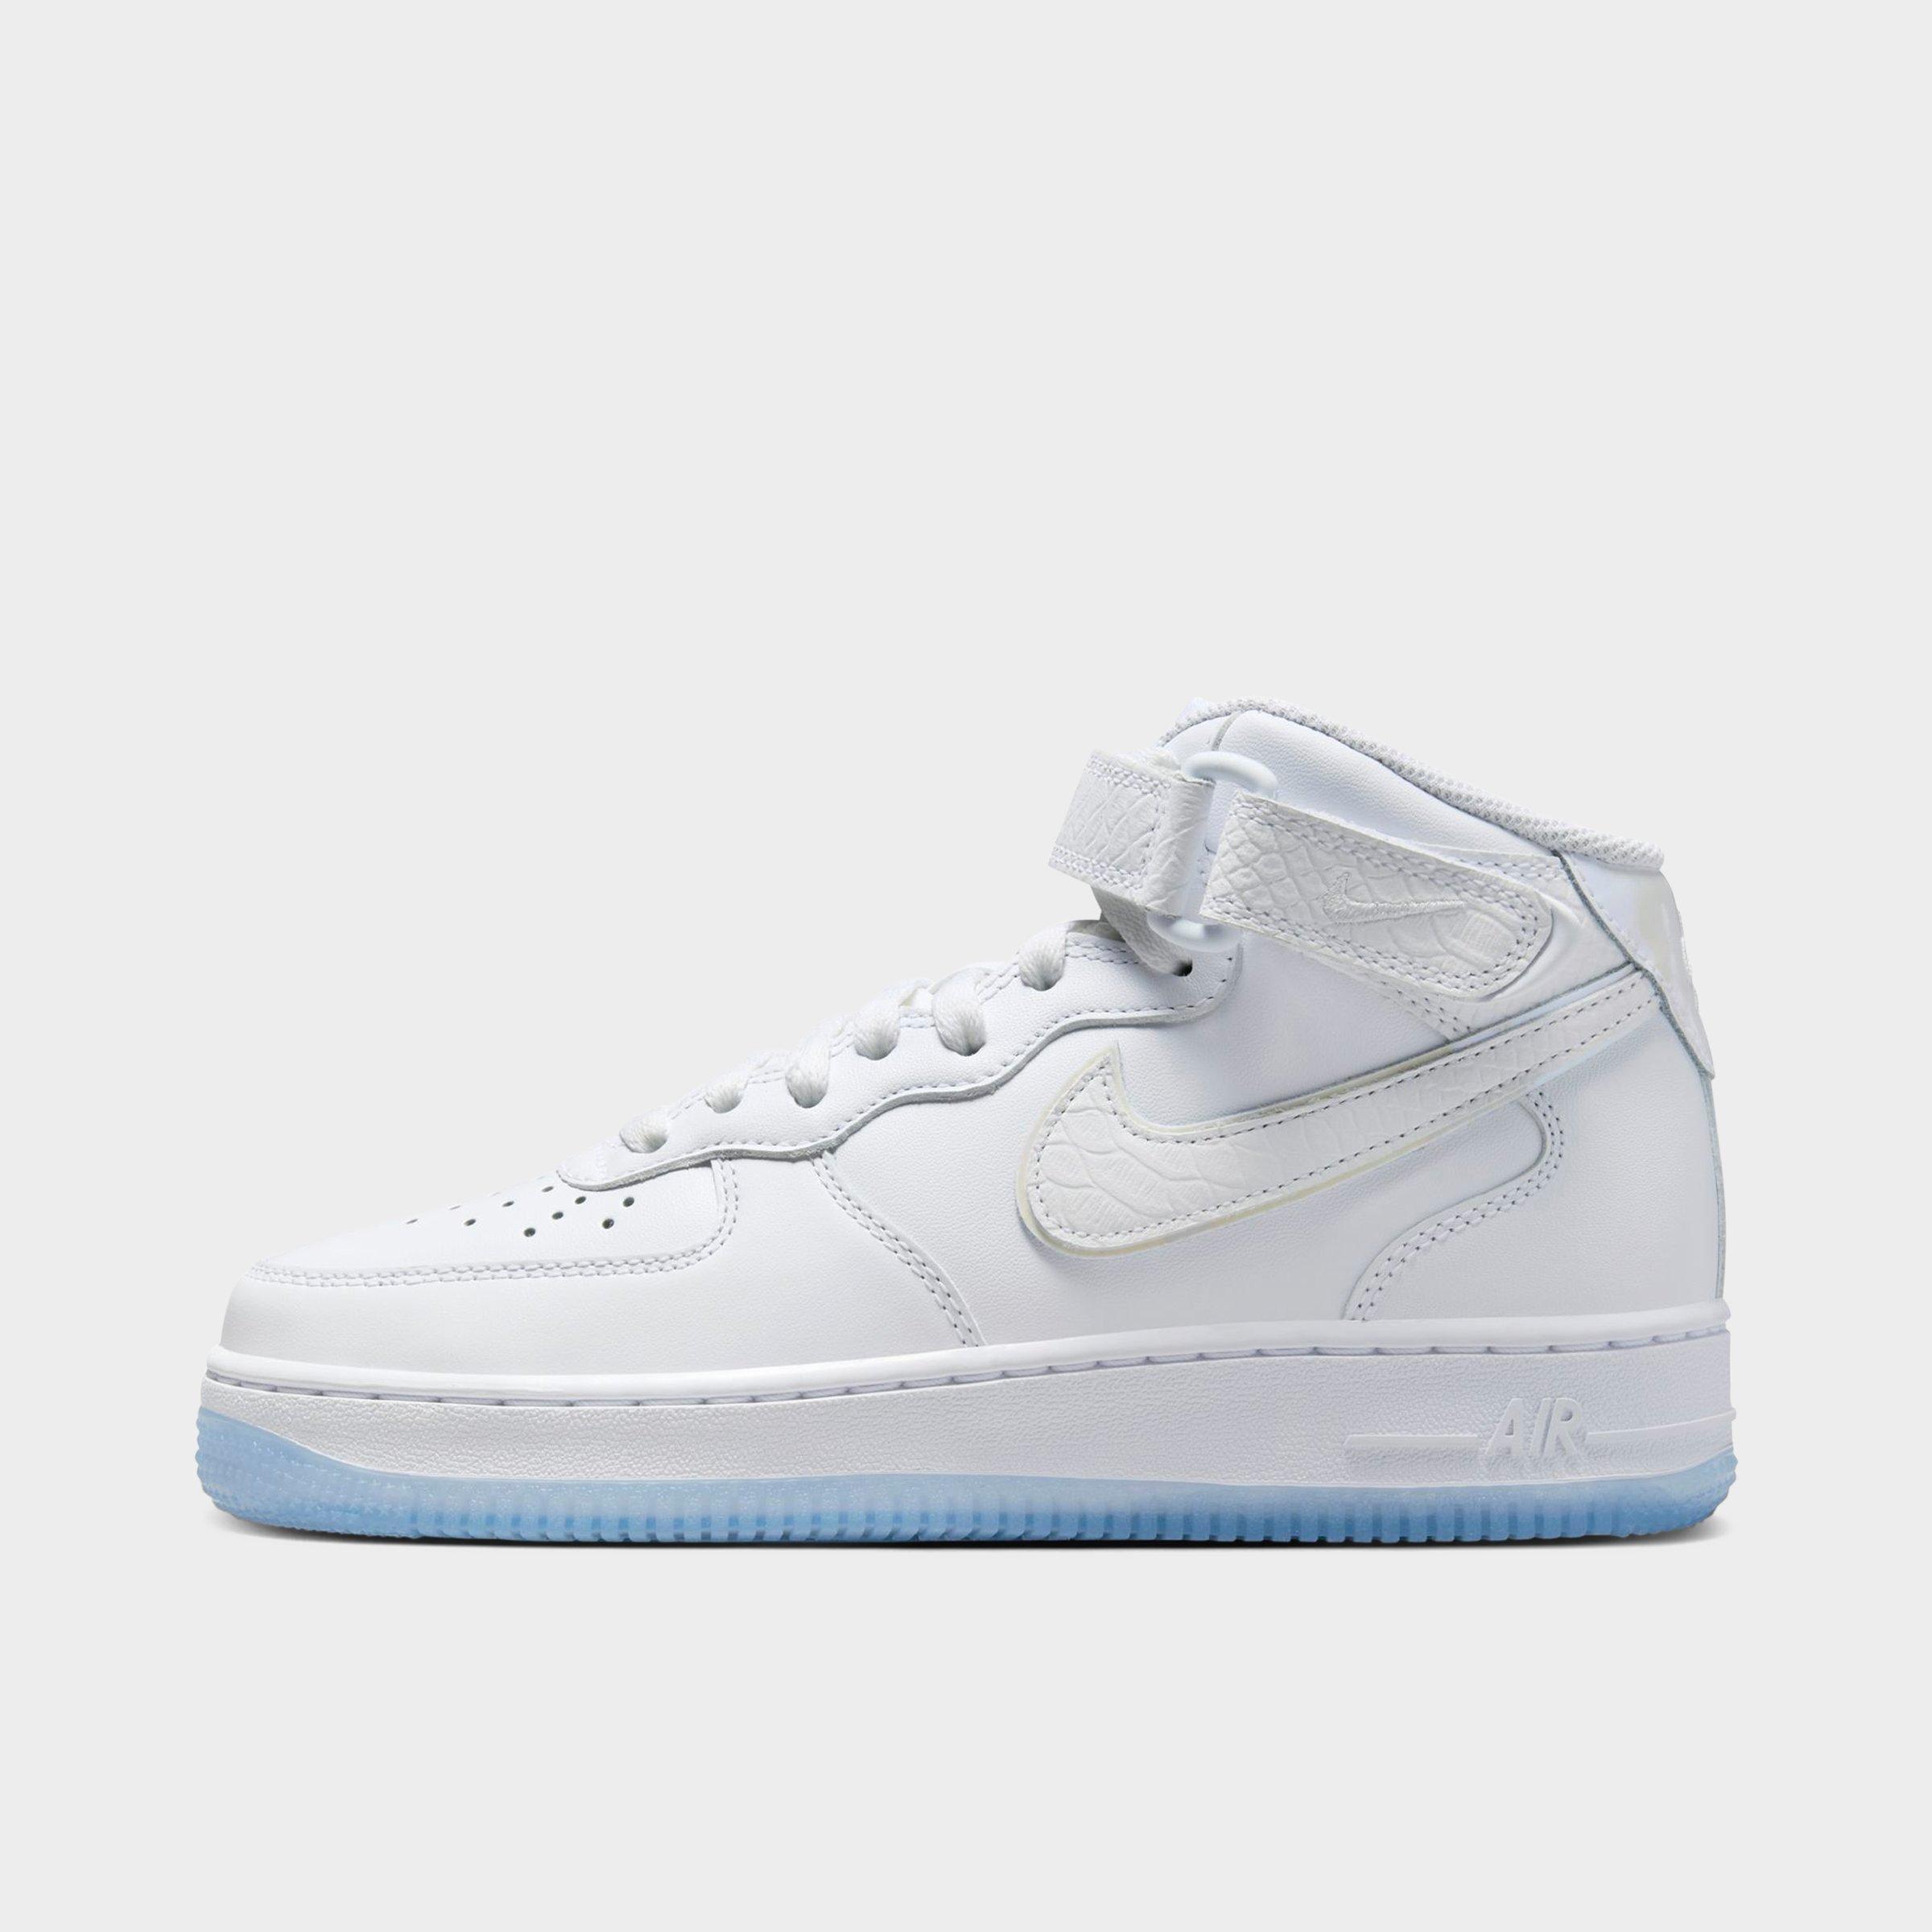 Nike Women's Air Force 1 Mid Shoes in White